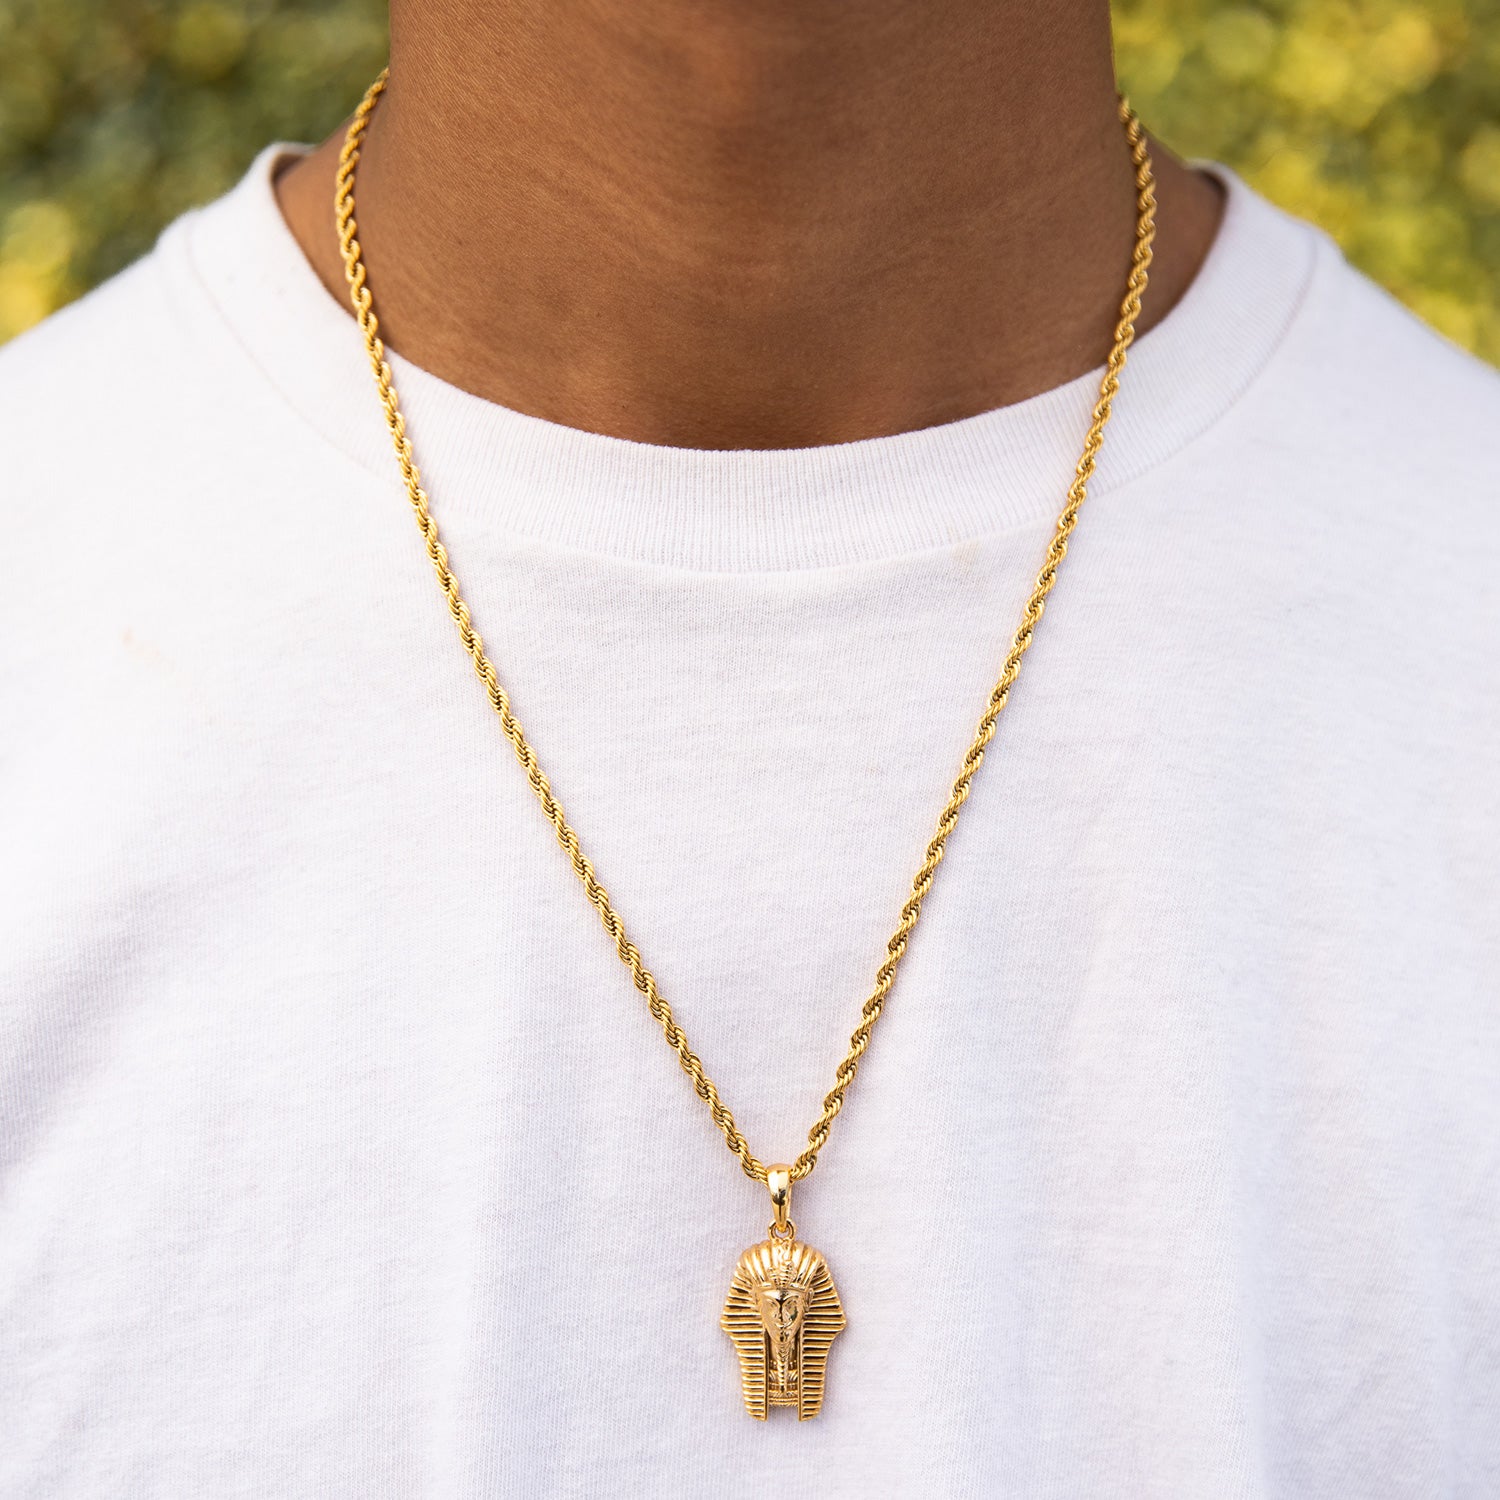 Gold Stainless Steel Pharaoh Necklace